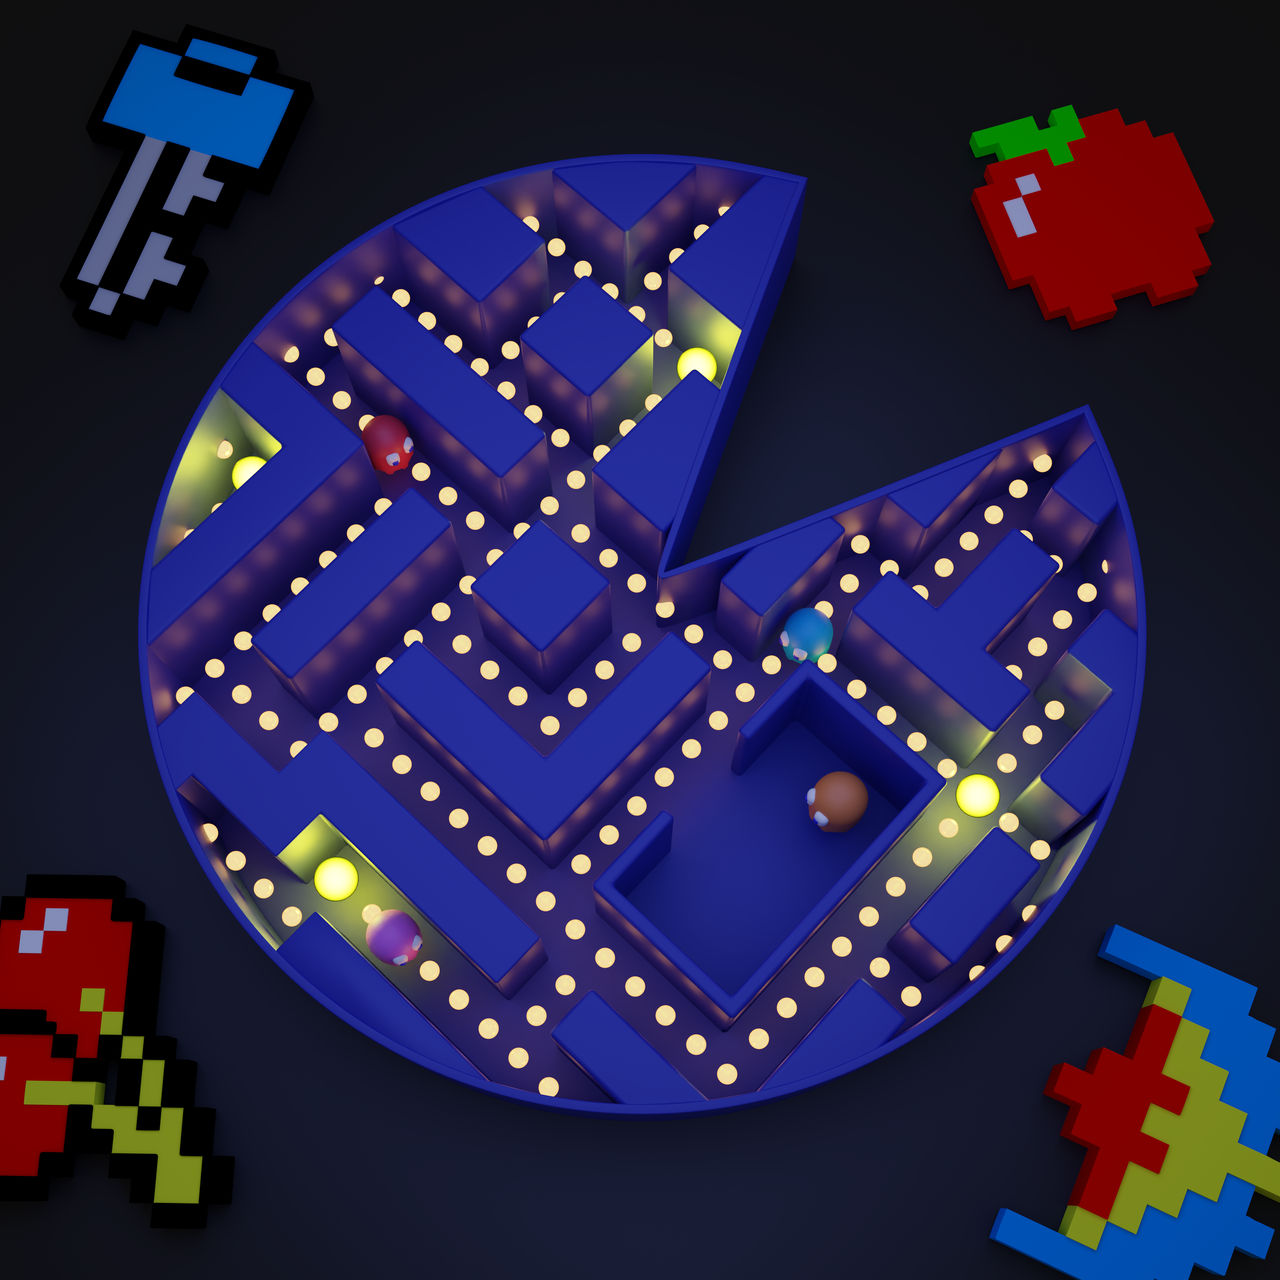 Pacman Search Maze by WesleyAbram on DeviantArt